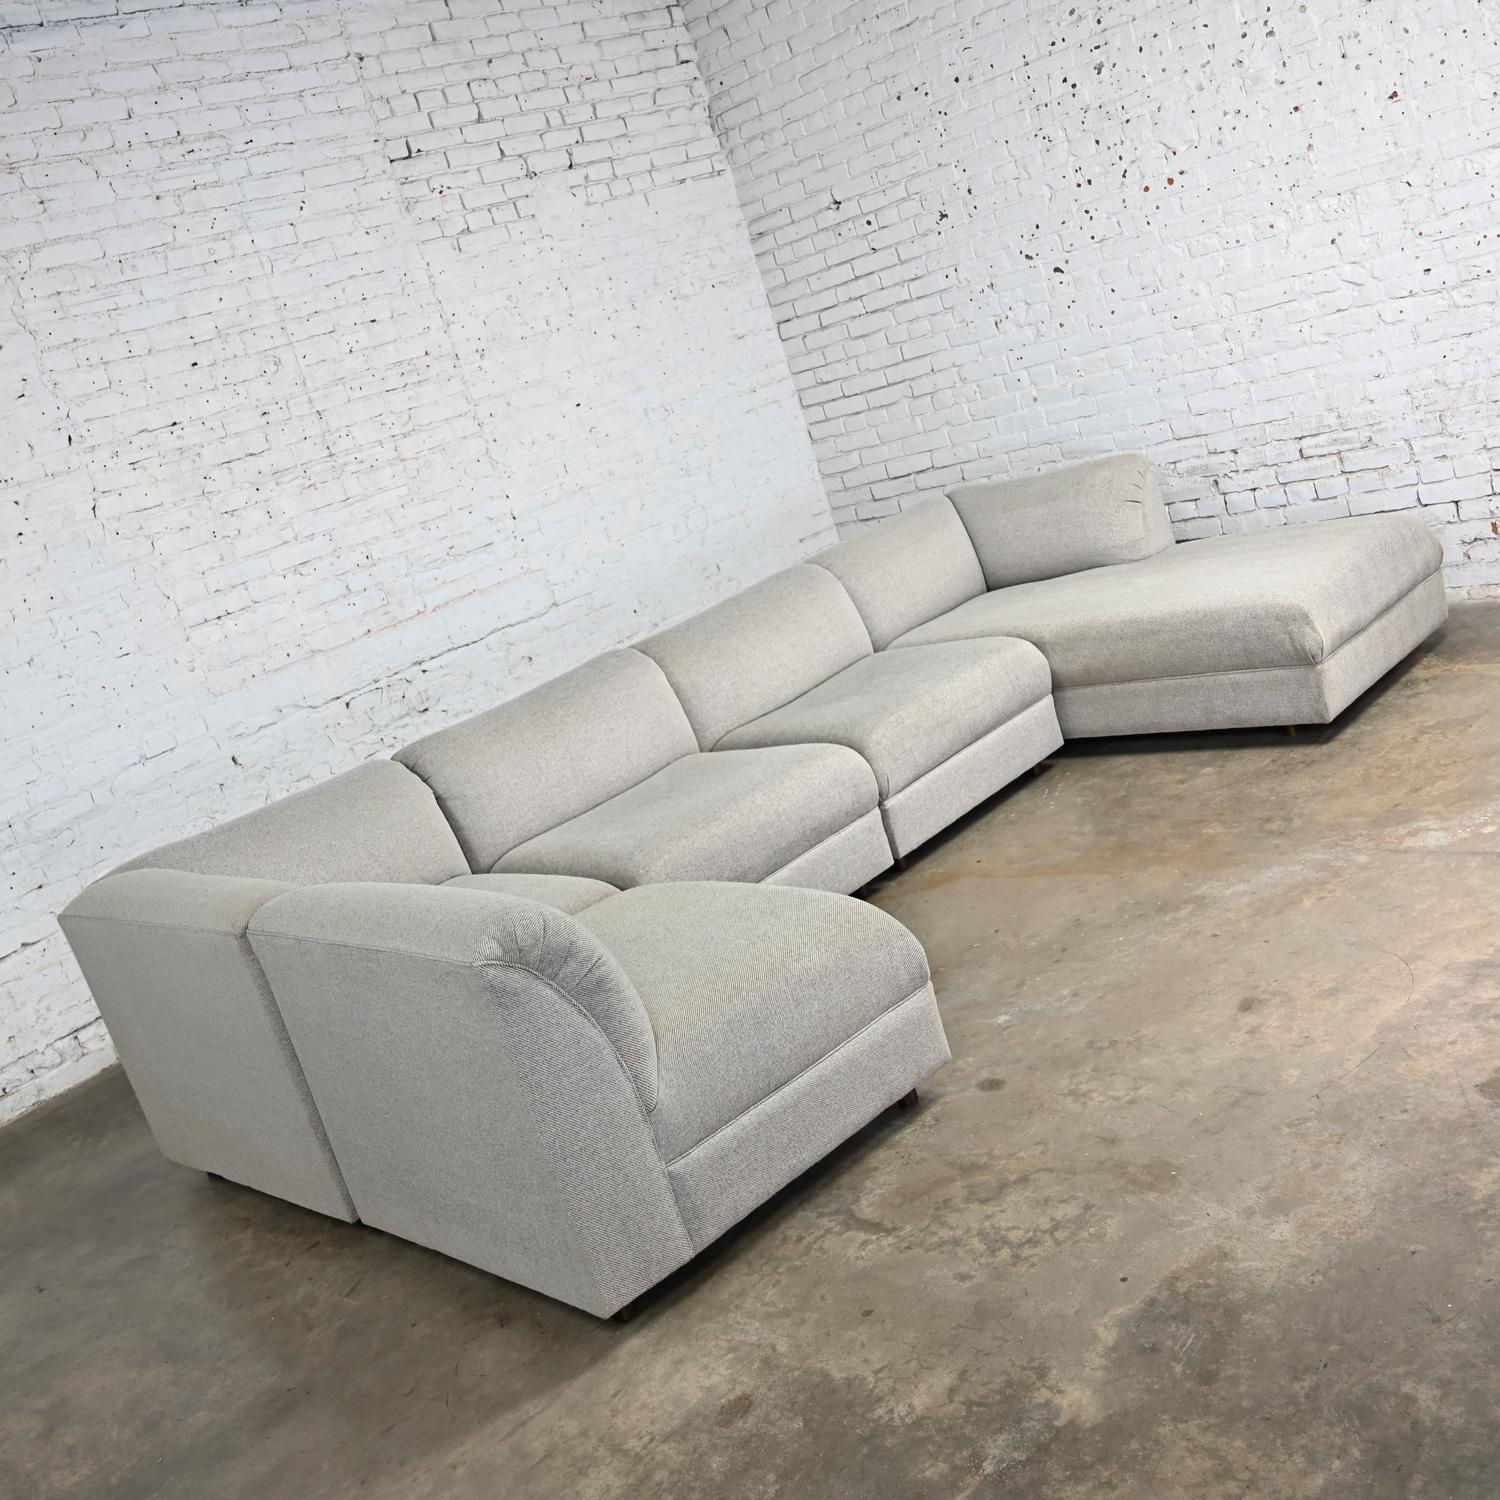 American Late 20th Century Modern Modular Sectional Sofa 5 Pieces with Chaise Gray Tweed  For Sale